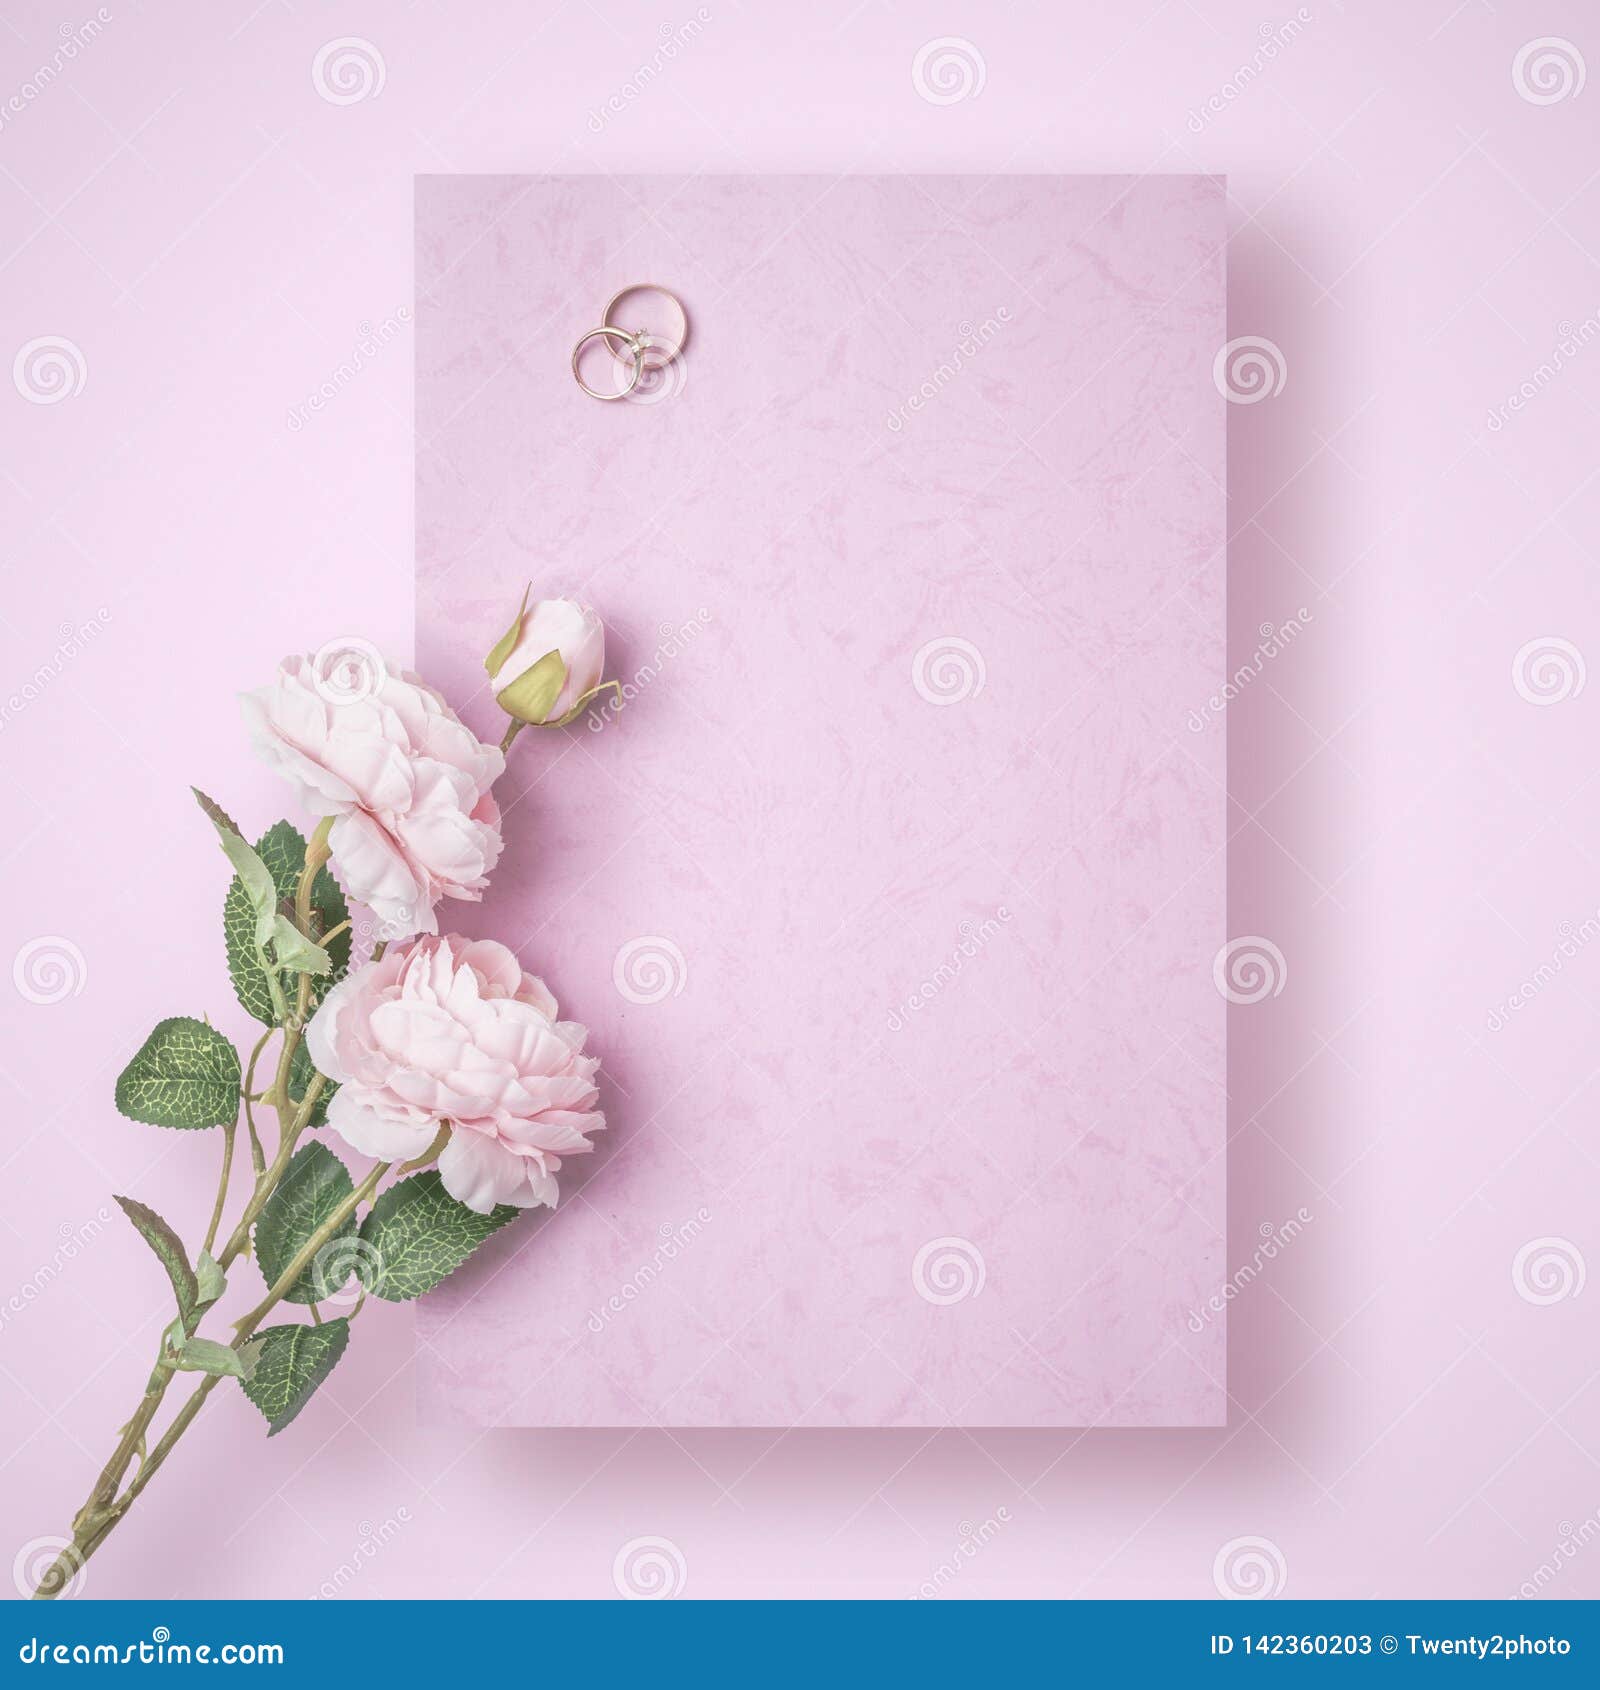 A Romantic Love Letter that is yet To Be Written with Wedding Rings and  Rose on Pink Background. Stock Image - Image of concept, poem: 142360203